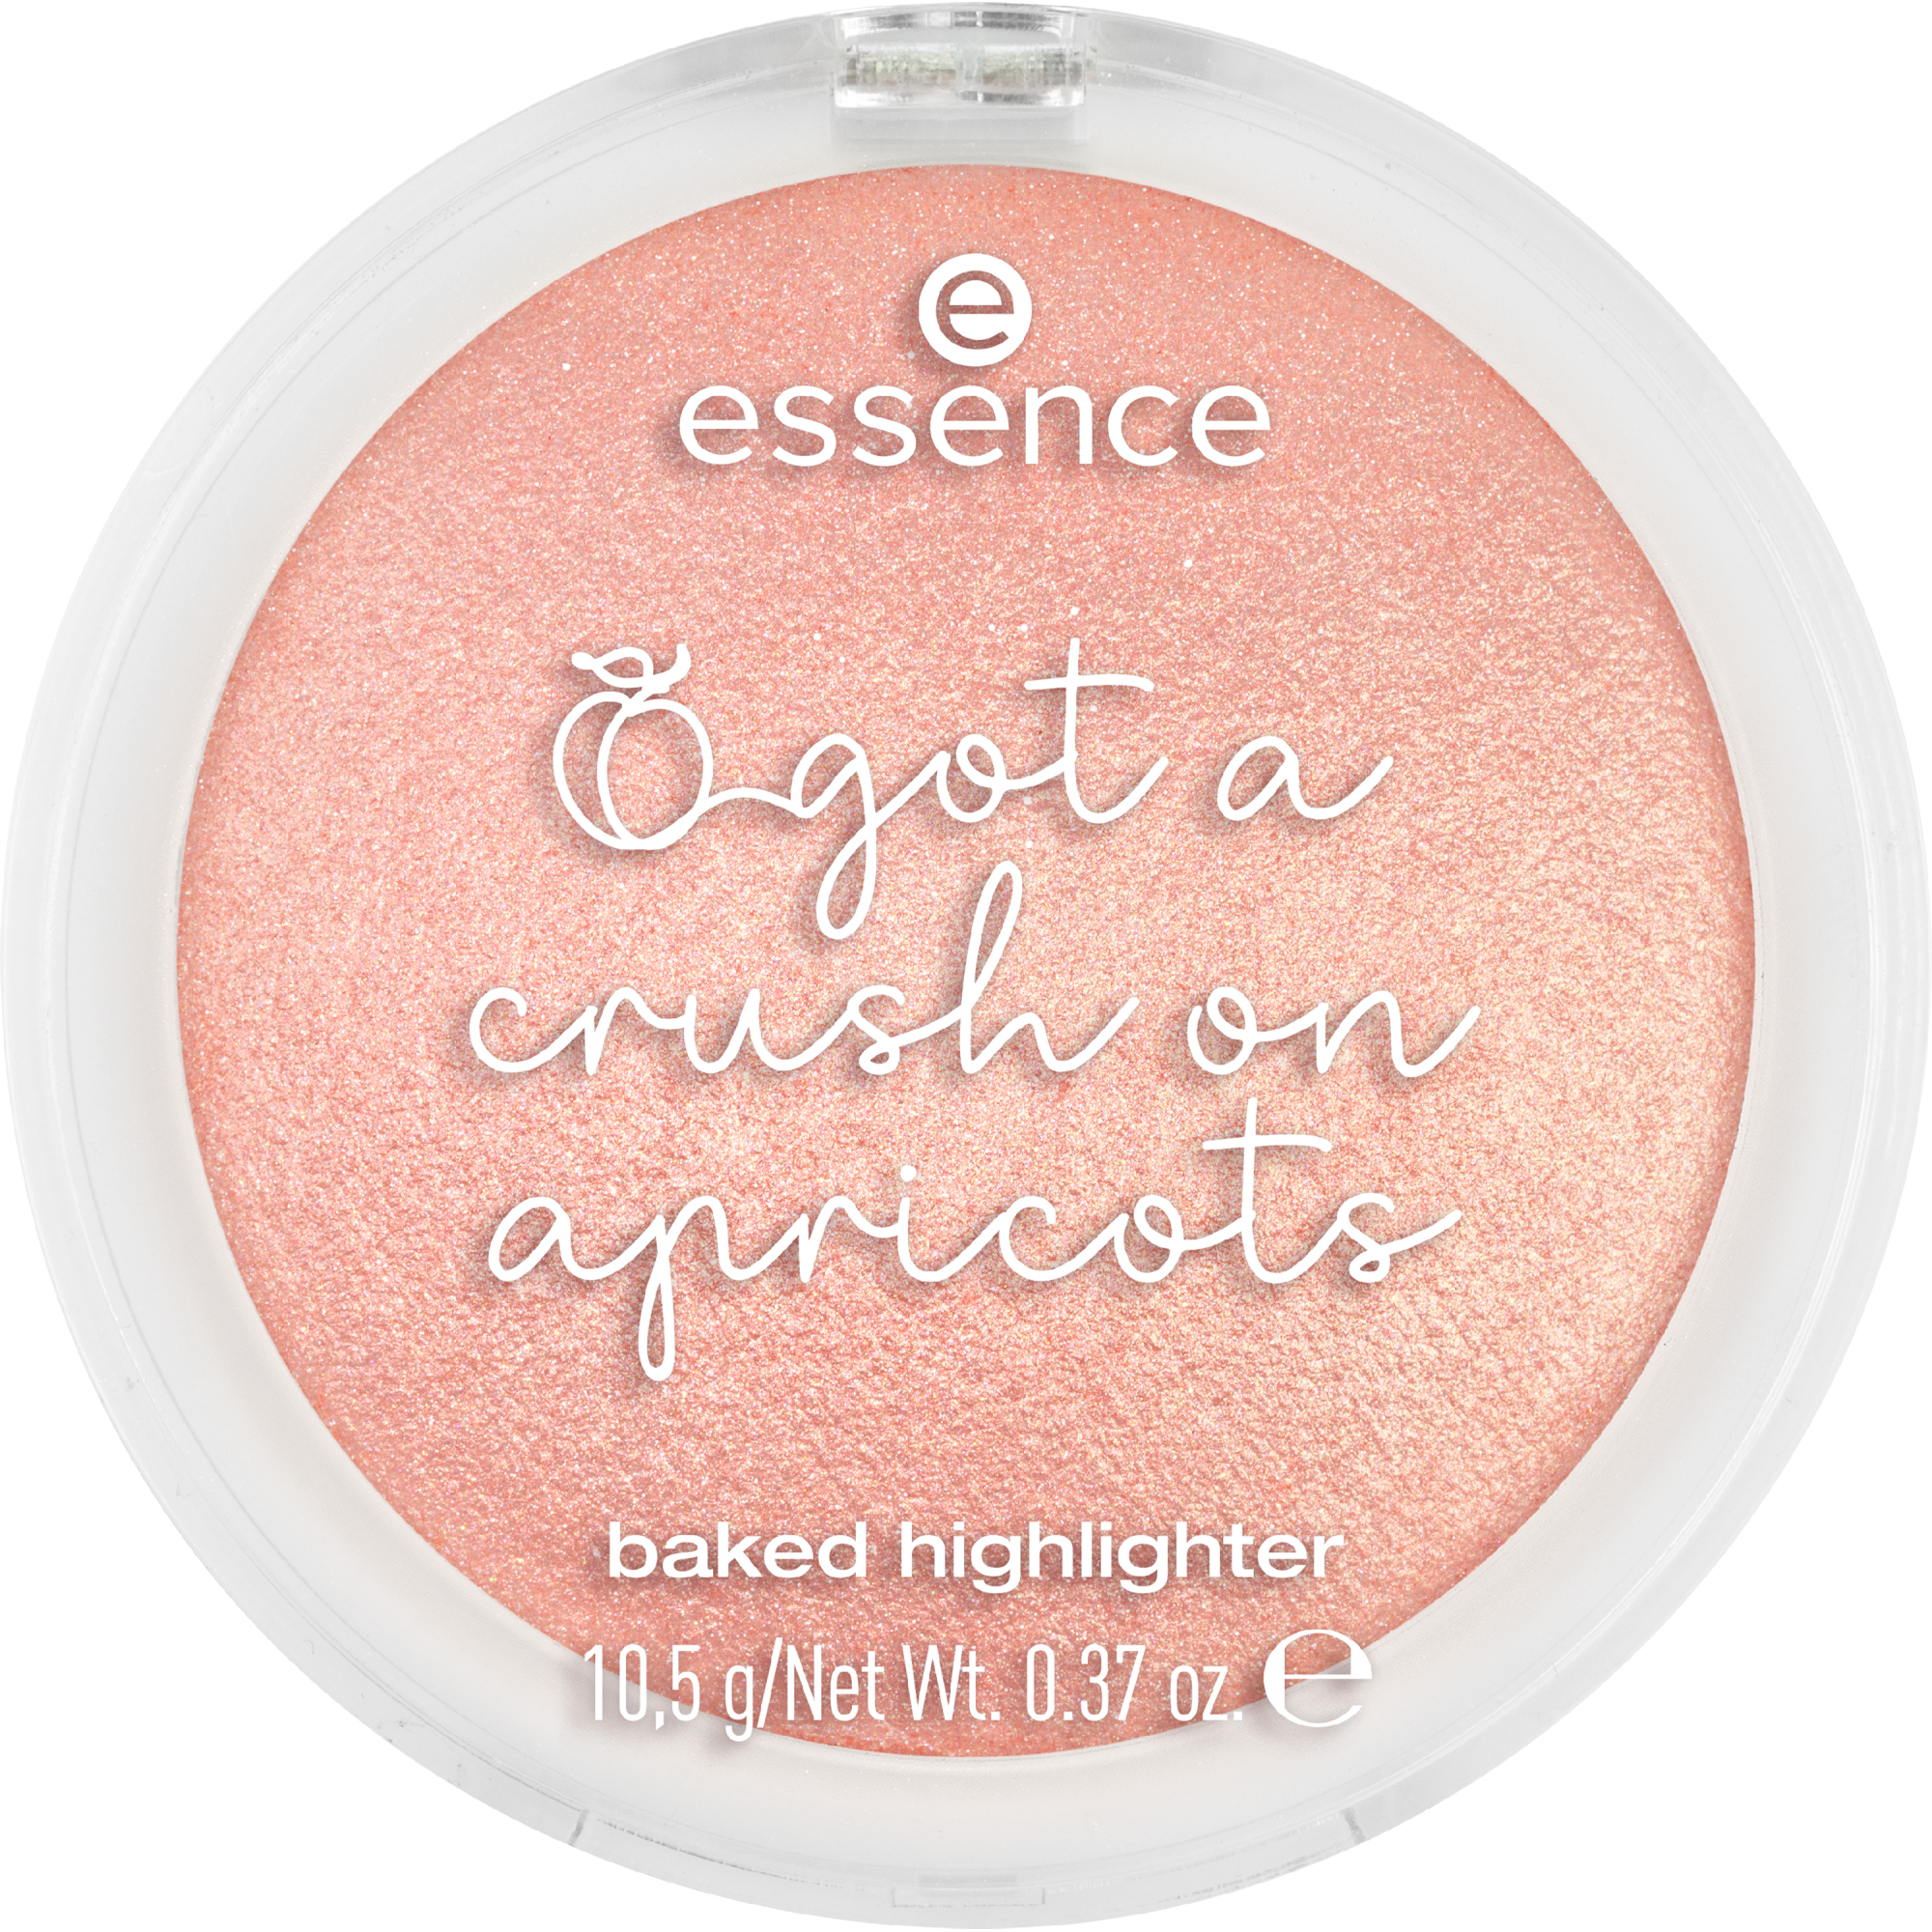 got a crush on apricots baked highlighter